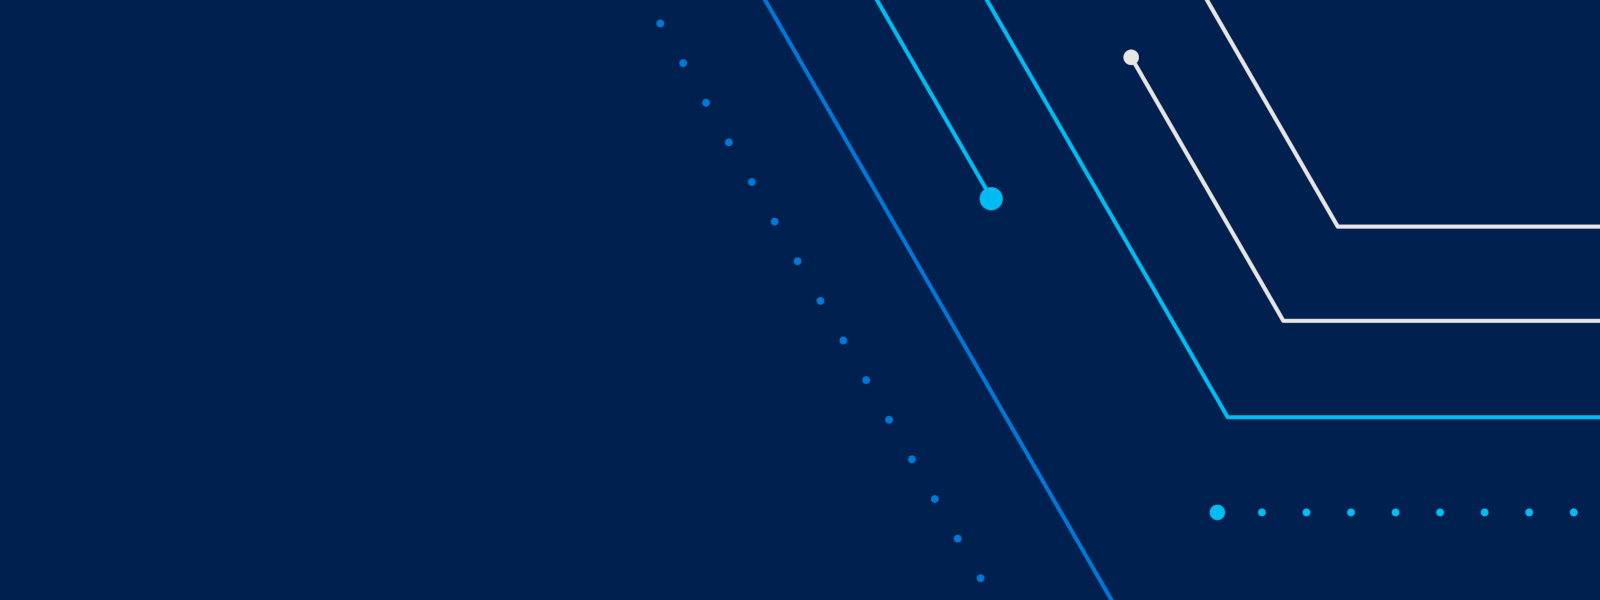 Illustration of blue solid and dotted lines on a dark blue background